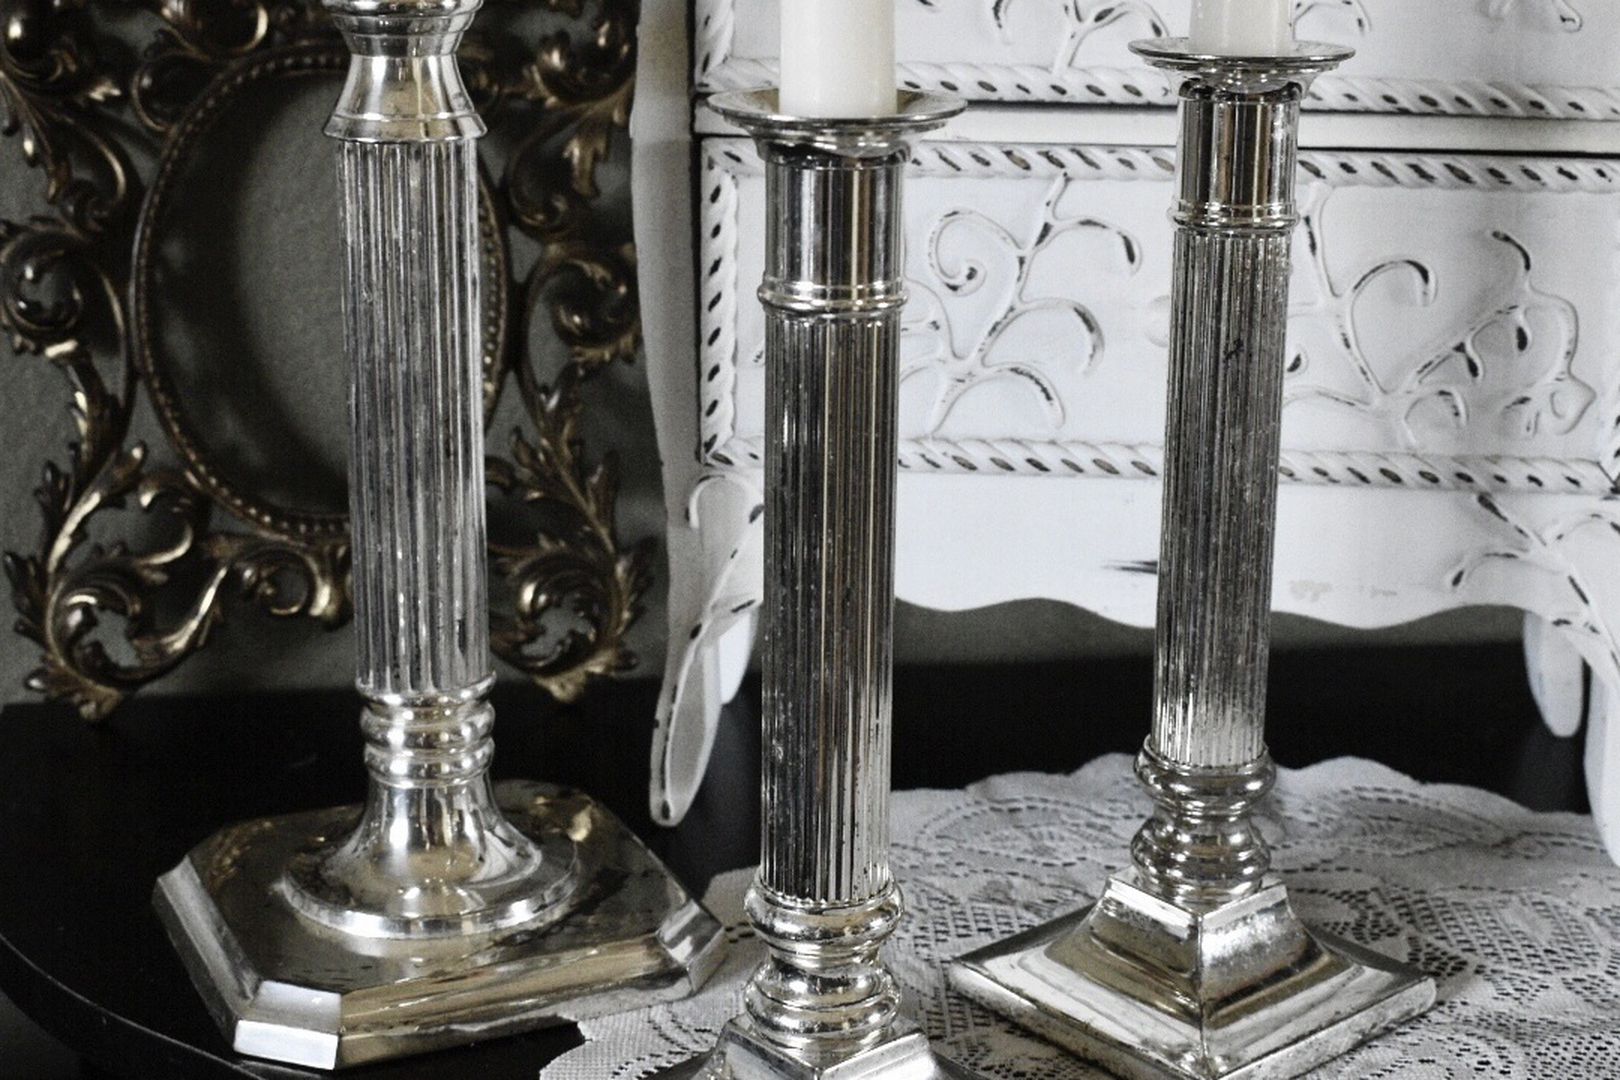 3 Vintage Metal Silver Plate Column Taper Candlestick Holders, Midcentury Candle Holders